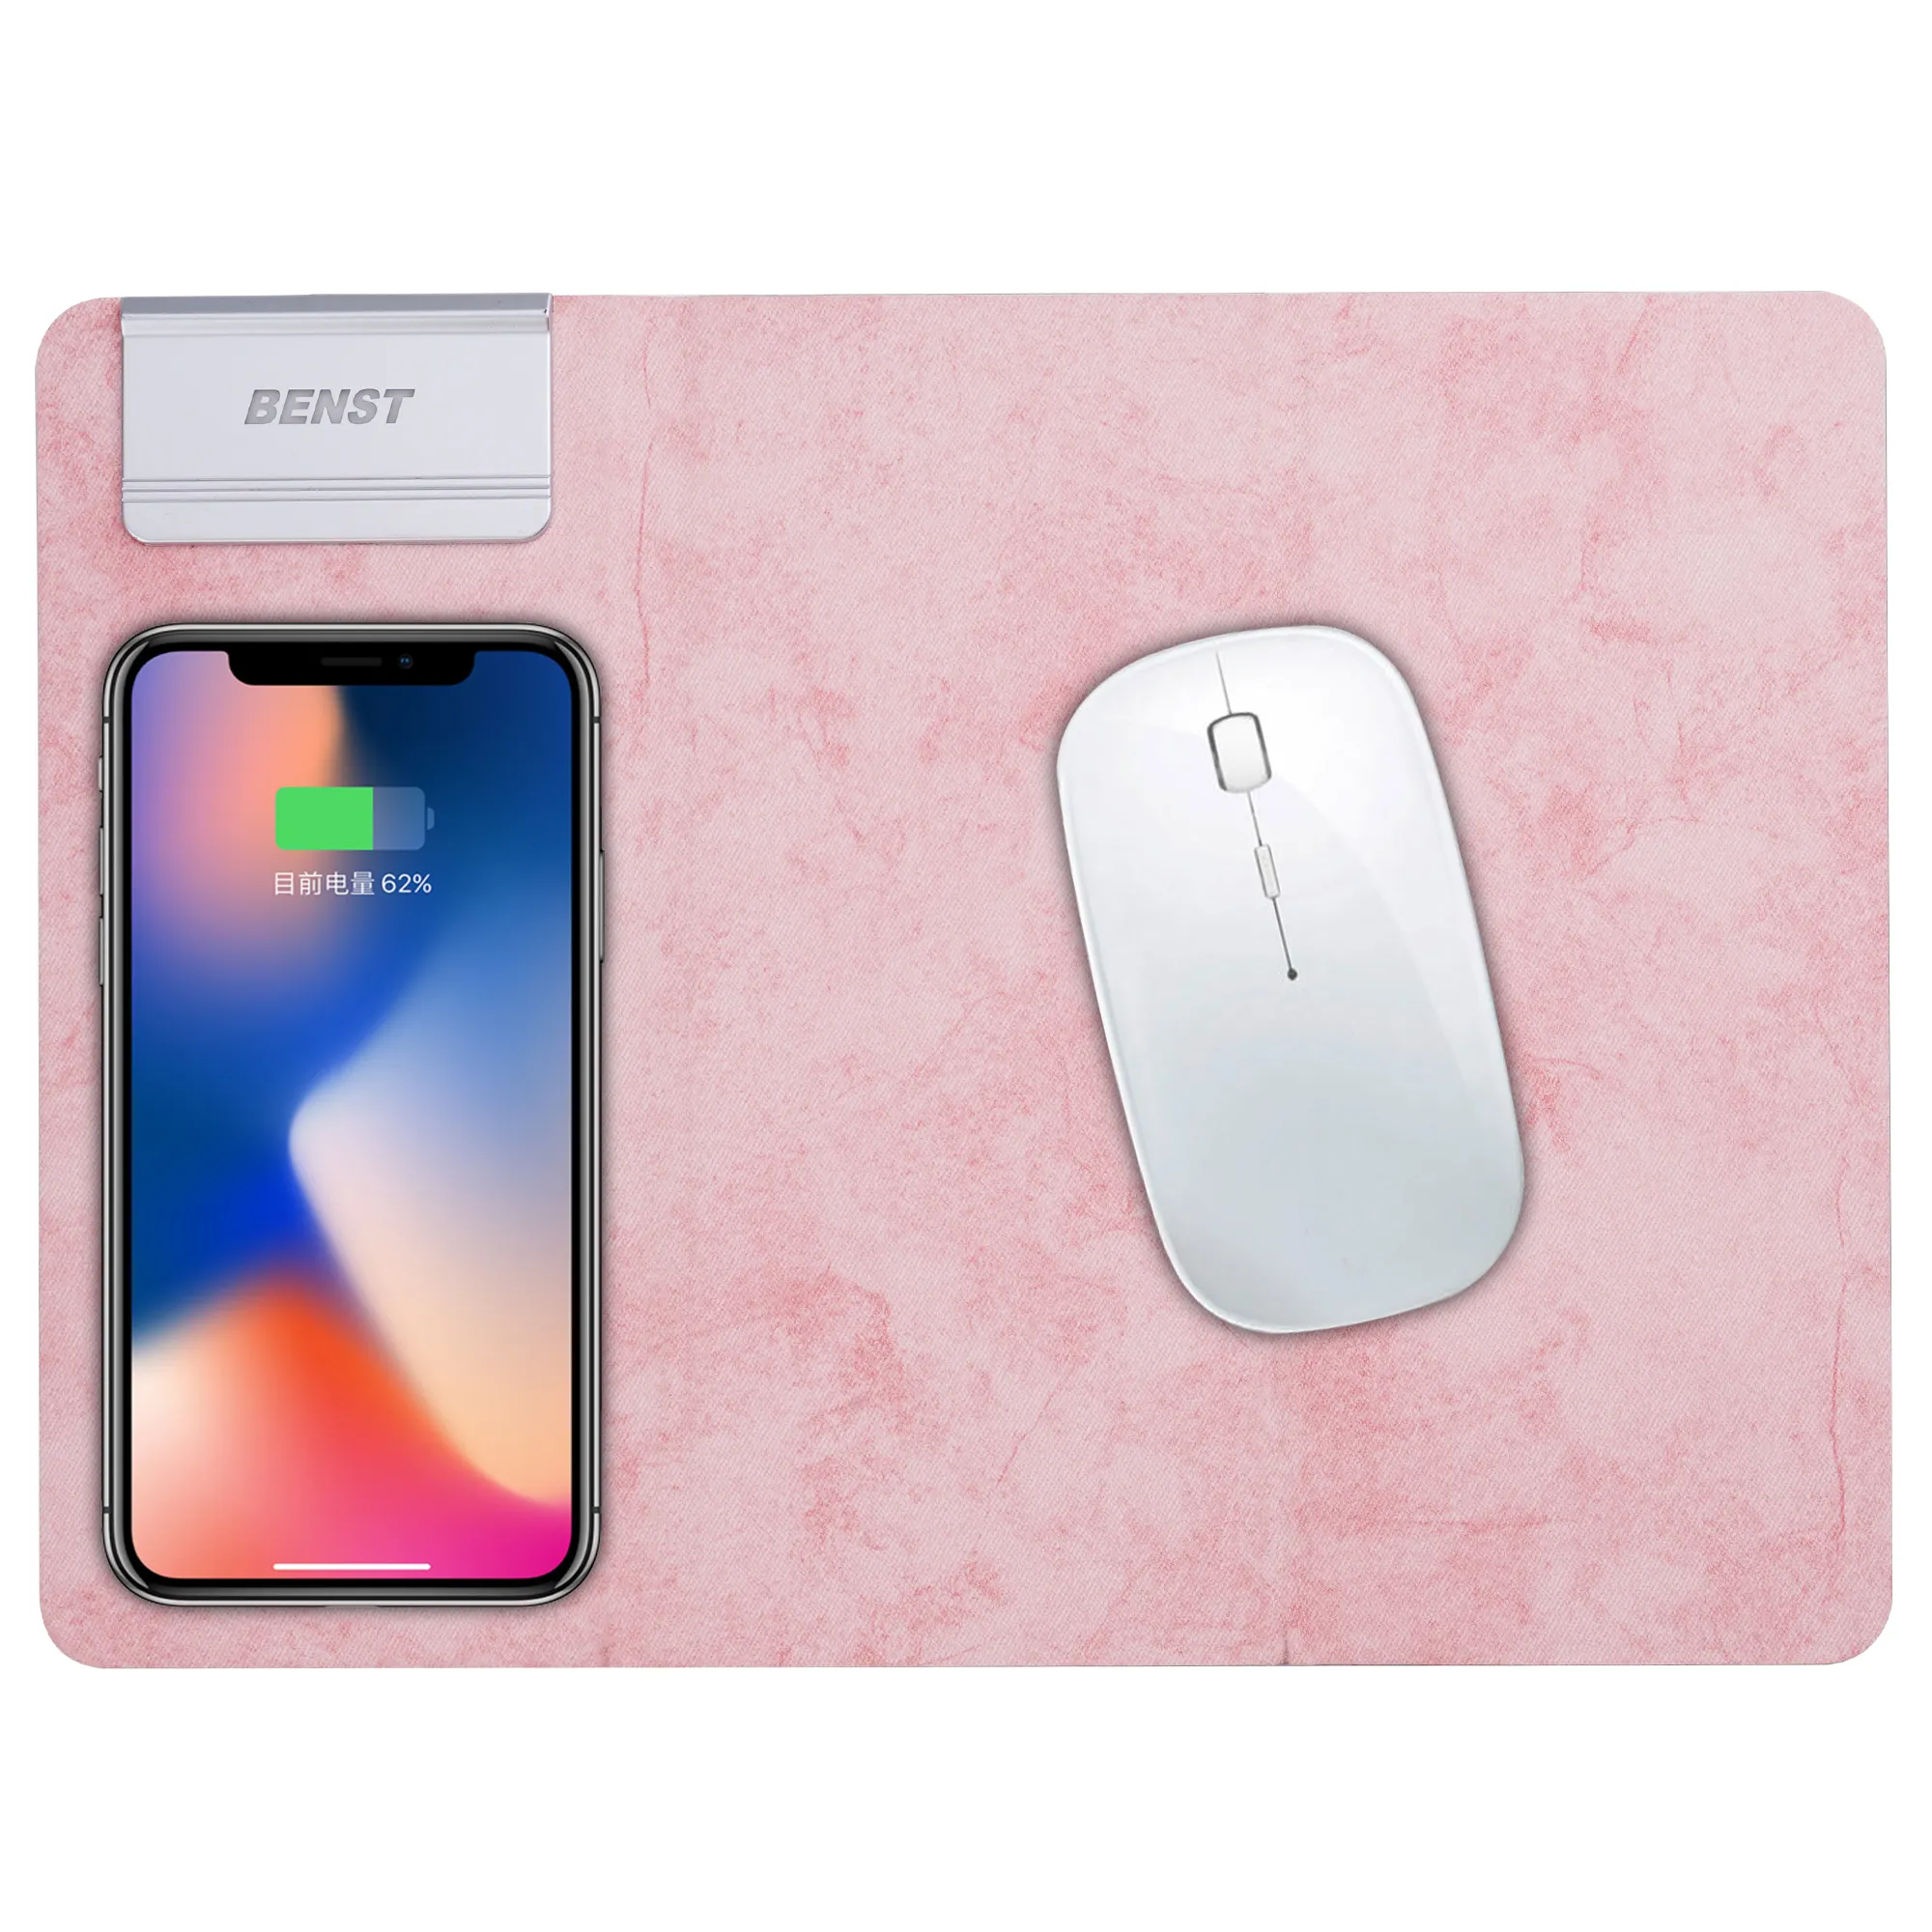 Wireless Charger Mouse Pad Fast Wireless Charger for Samsung Galaxy S10/s9/s8 Plus Note 9/8 for Iphone Xs Max/xr/x/ Xs /8/8 Plus